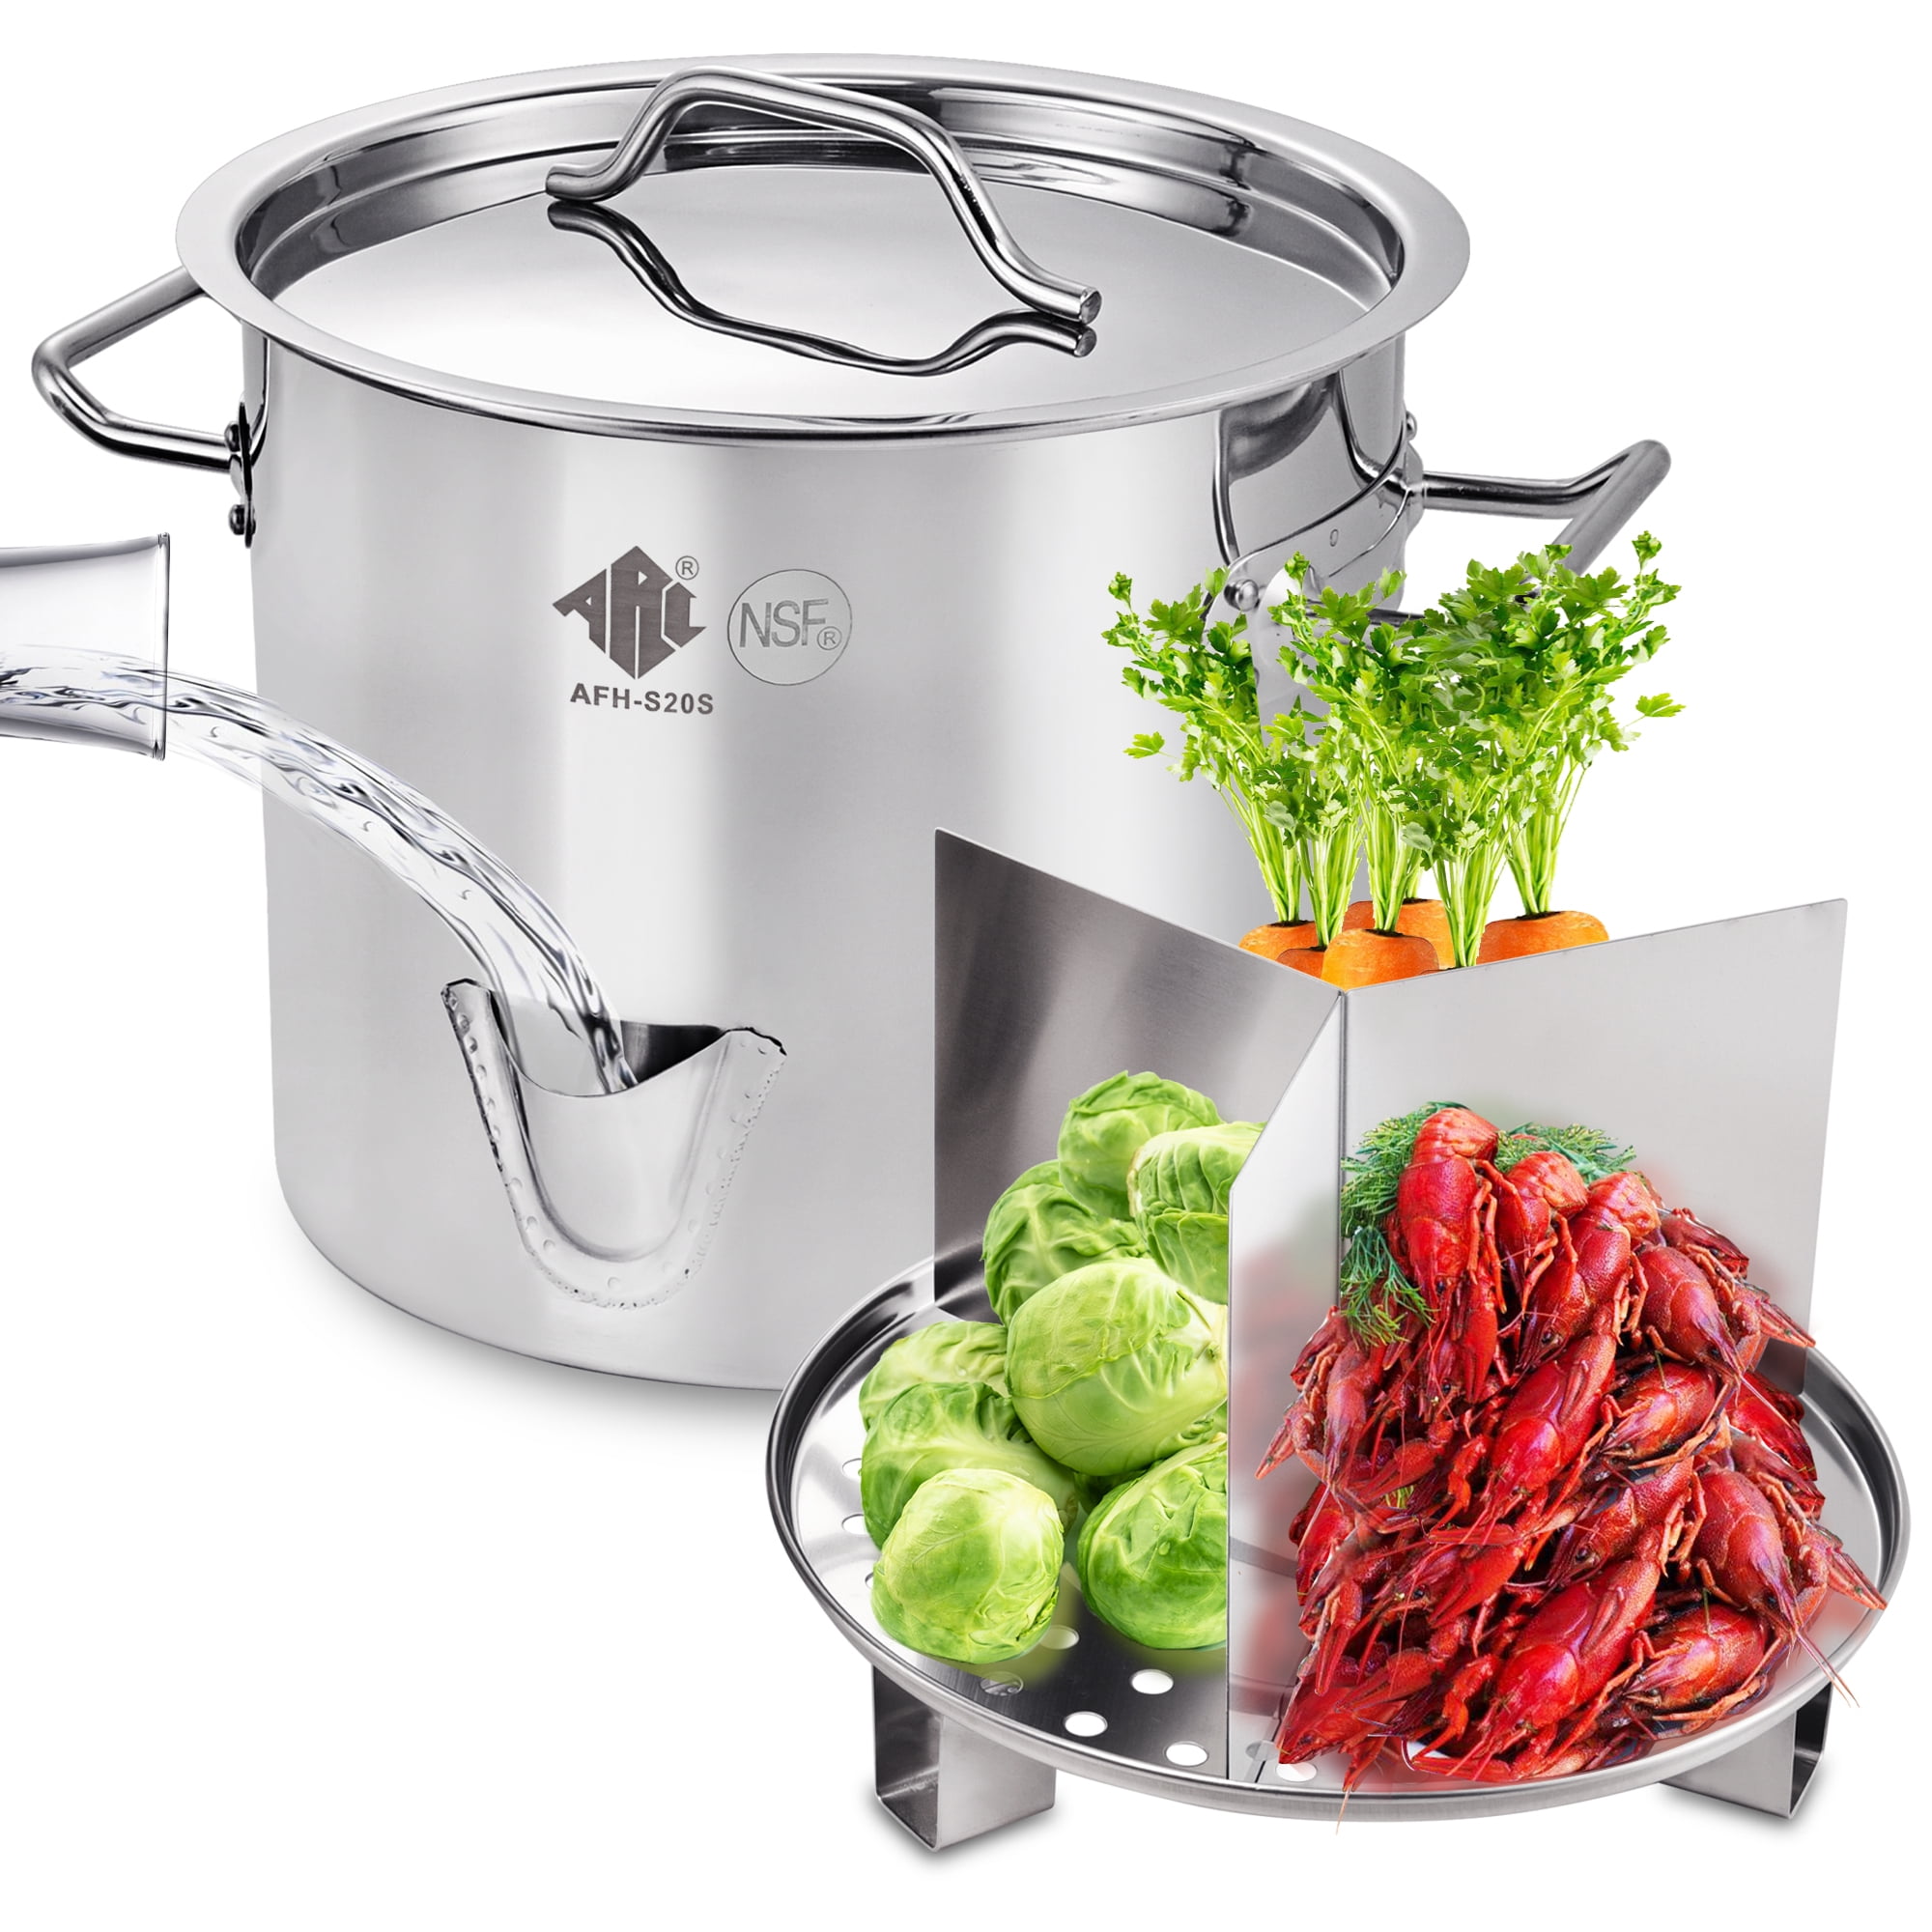 AmeriHome 3-Piece Stainless Steel Stock Pot Set 804973 - The Home